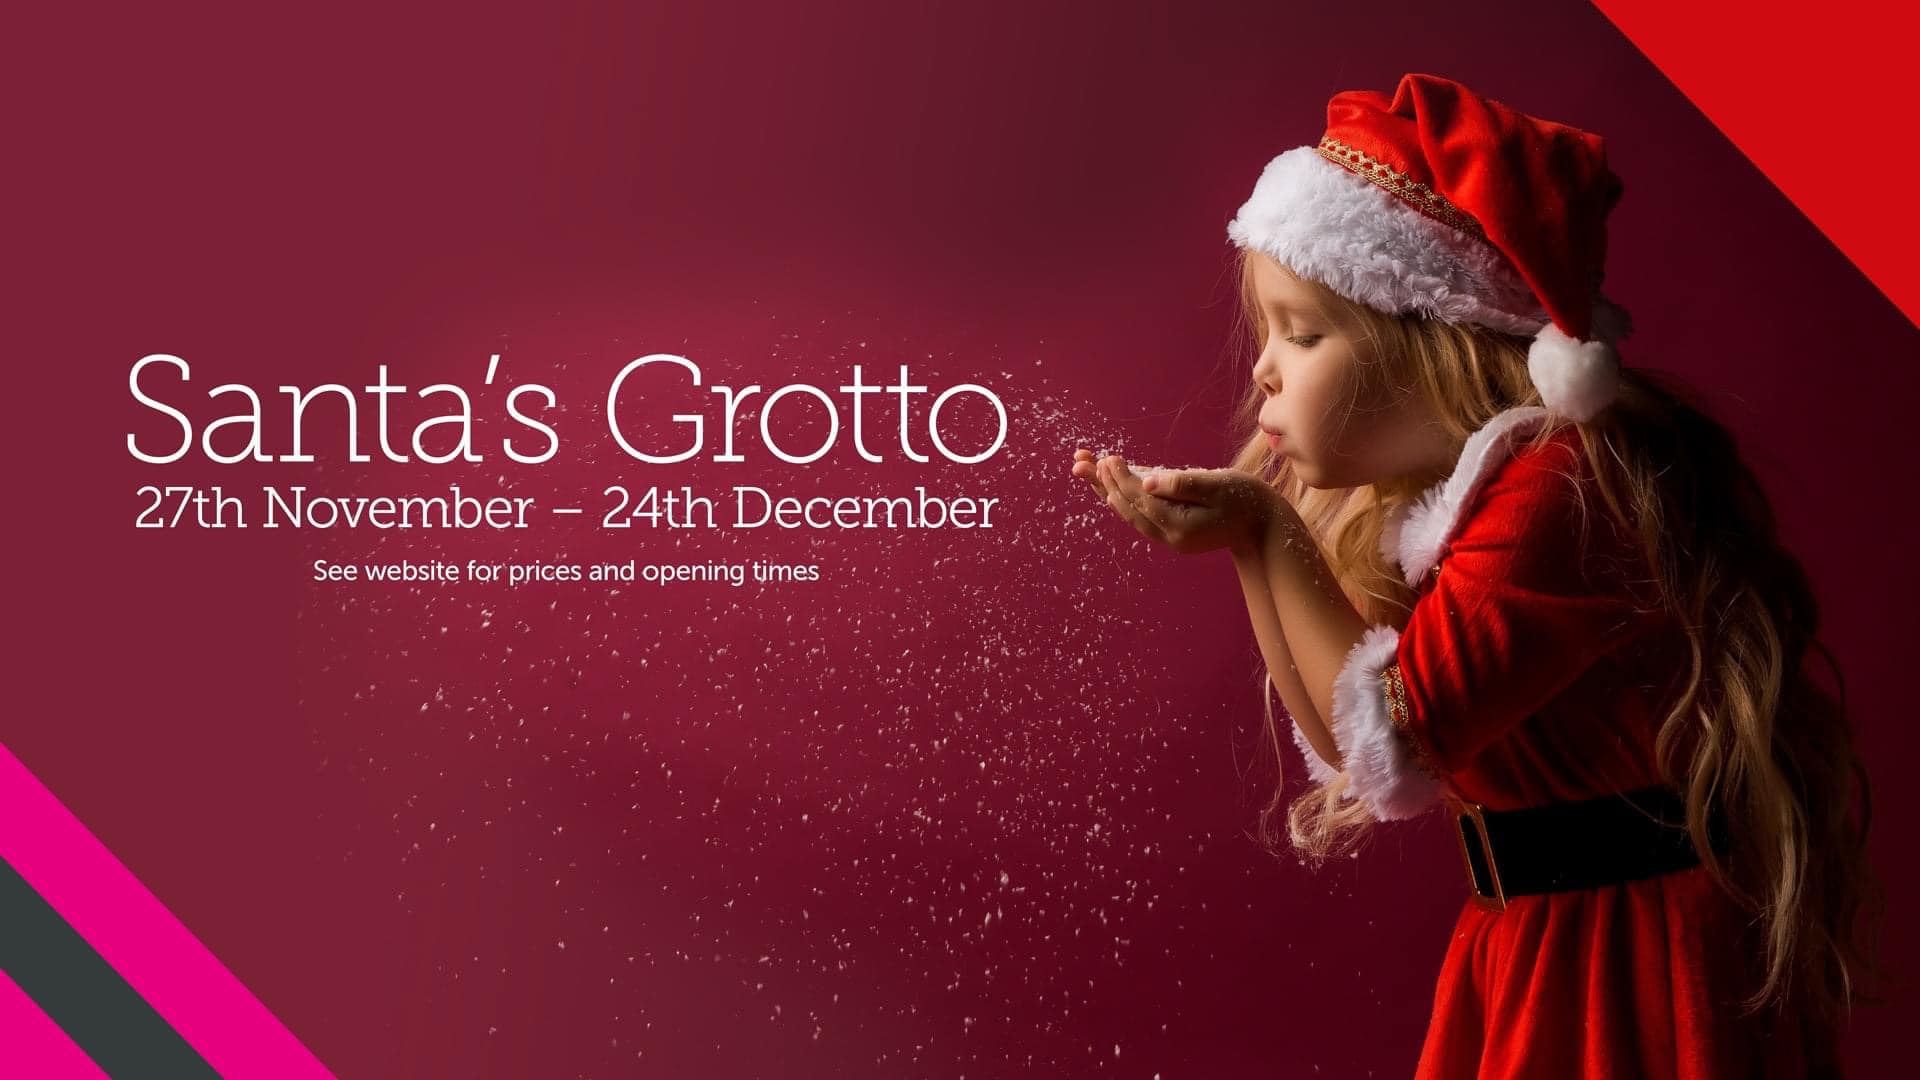 Santa’s Grotto is coming to New Square!